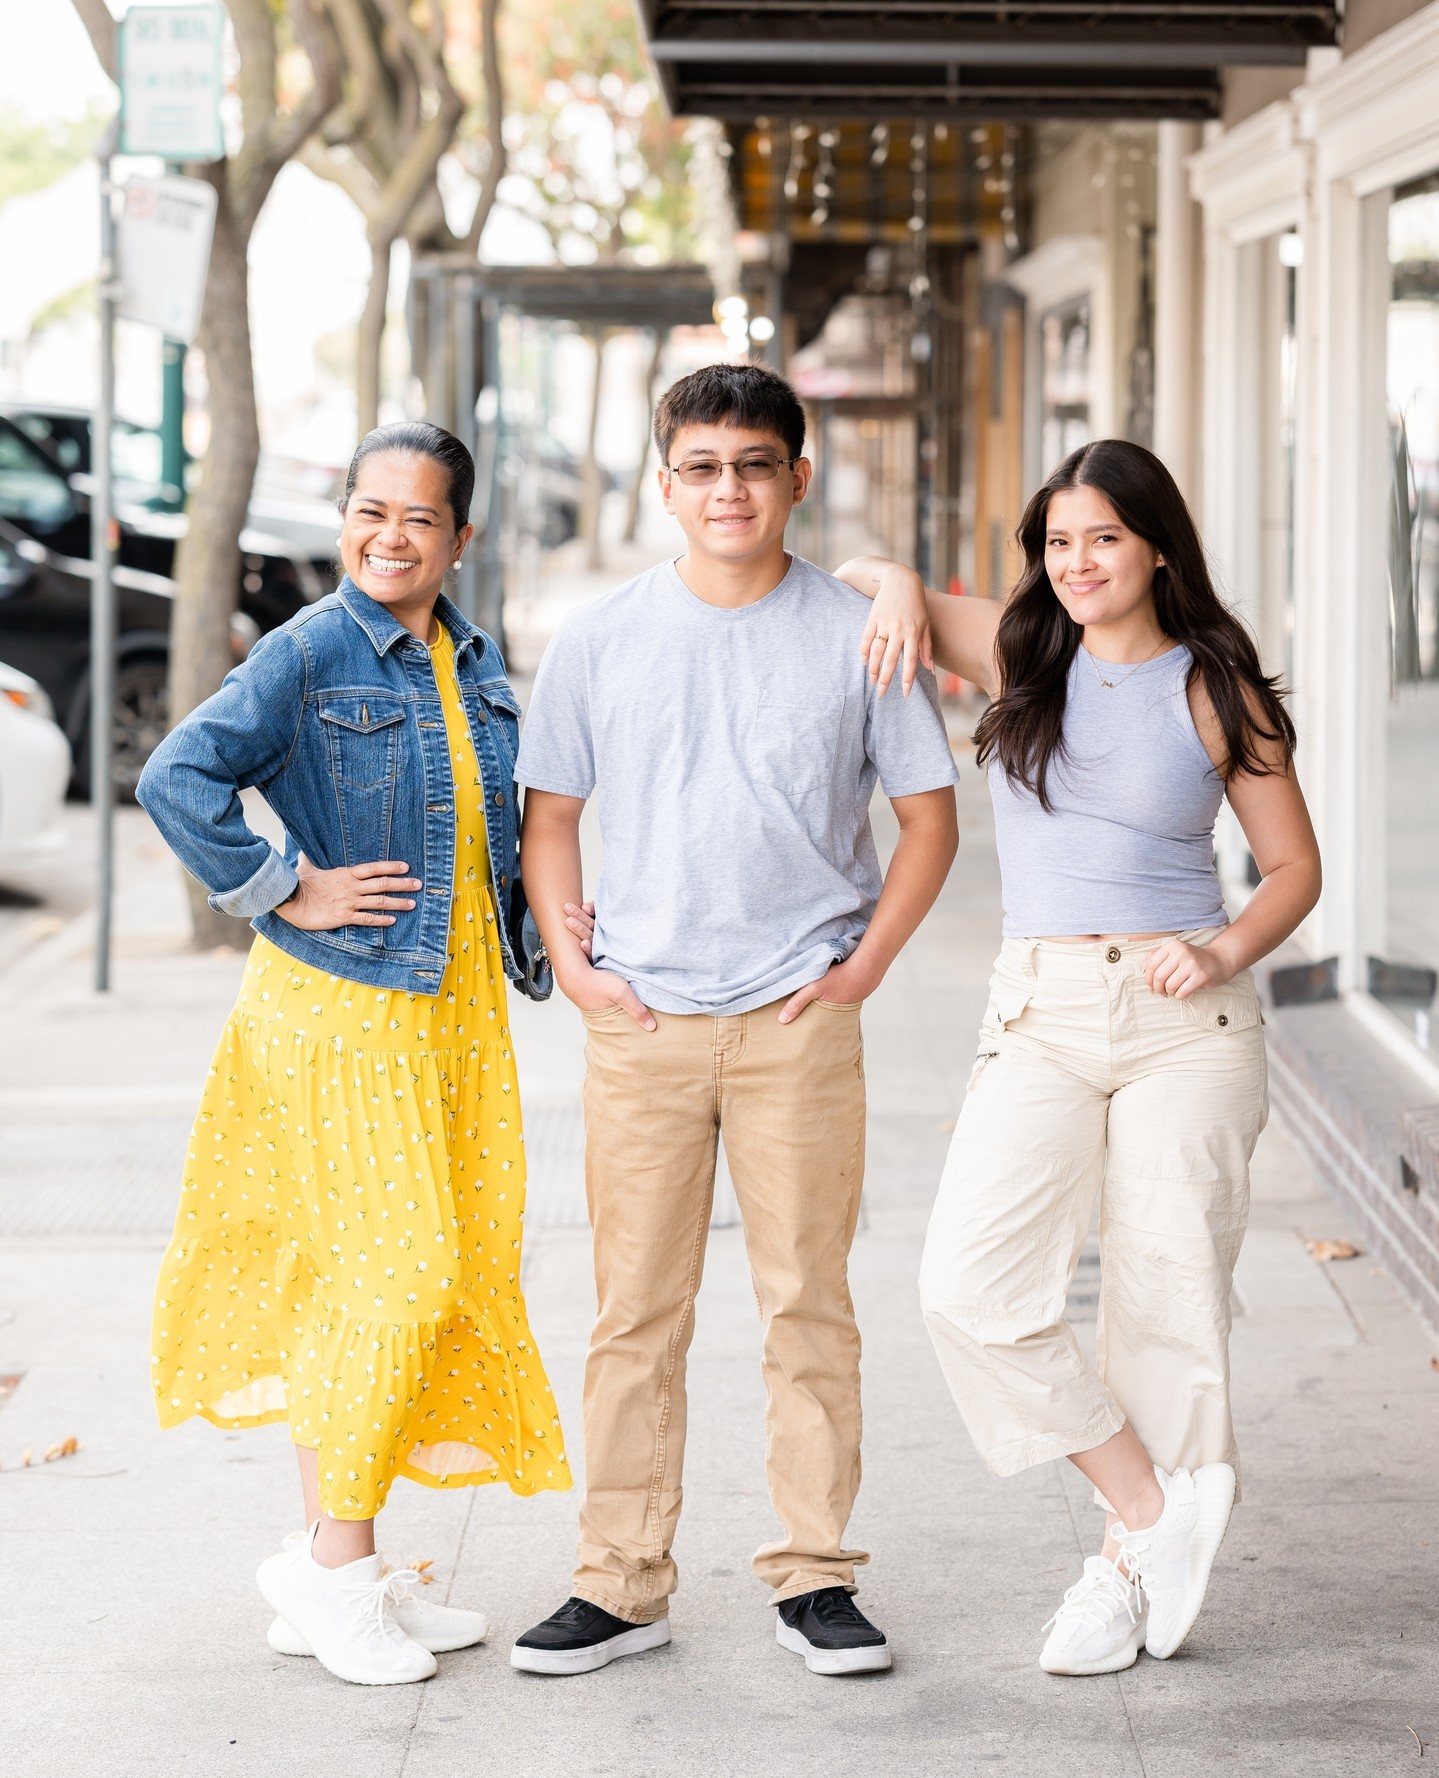 Happy National Sons Day Adrian @emperorchong982! ⁠
⁠
Thank you for always humoring me when I tell you that you will be in a photo shoot (even when you don't want to 😅). You are always ready with a smile when I ask (like here with your Godmother Joy and Ate JD). I thank God for you and how you have enriched your parents' lives. ⁠
⁠
Good luck on race day today at Lodi Lake Park 😀⁠
⁠
#boymom #nationalsonsday #mom #son #portraitphotographer #lodifamilyphotographer #stocktonfamilyphotographer #stocktonphotographer #lodiphotographer #giachongphotography